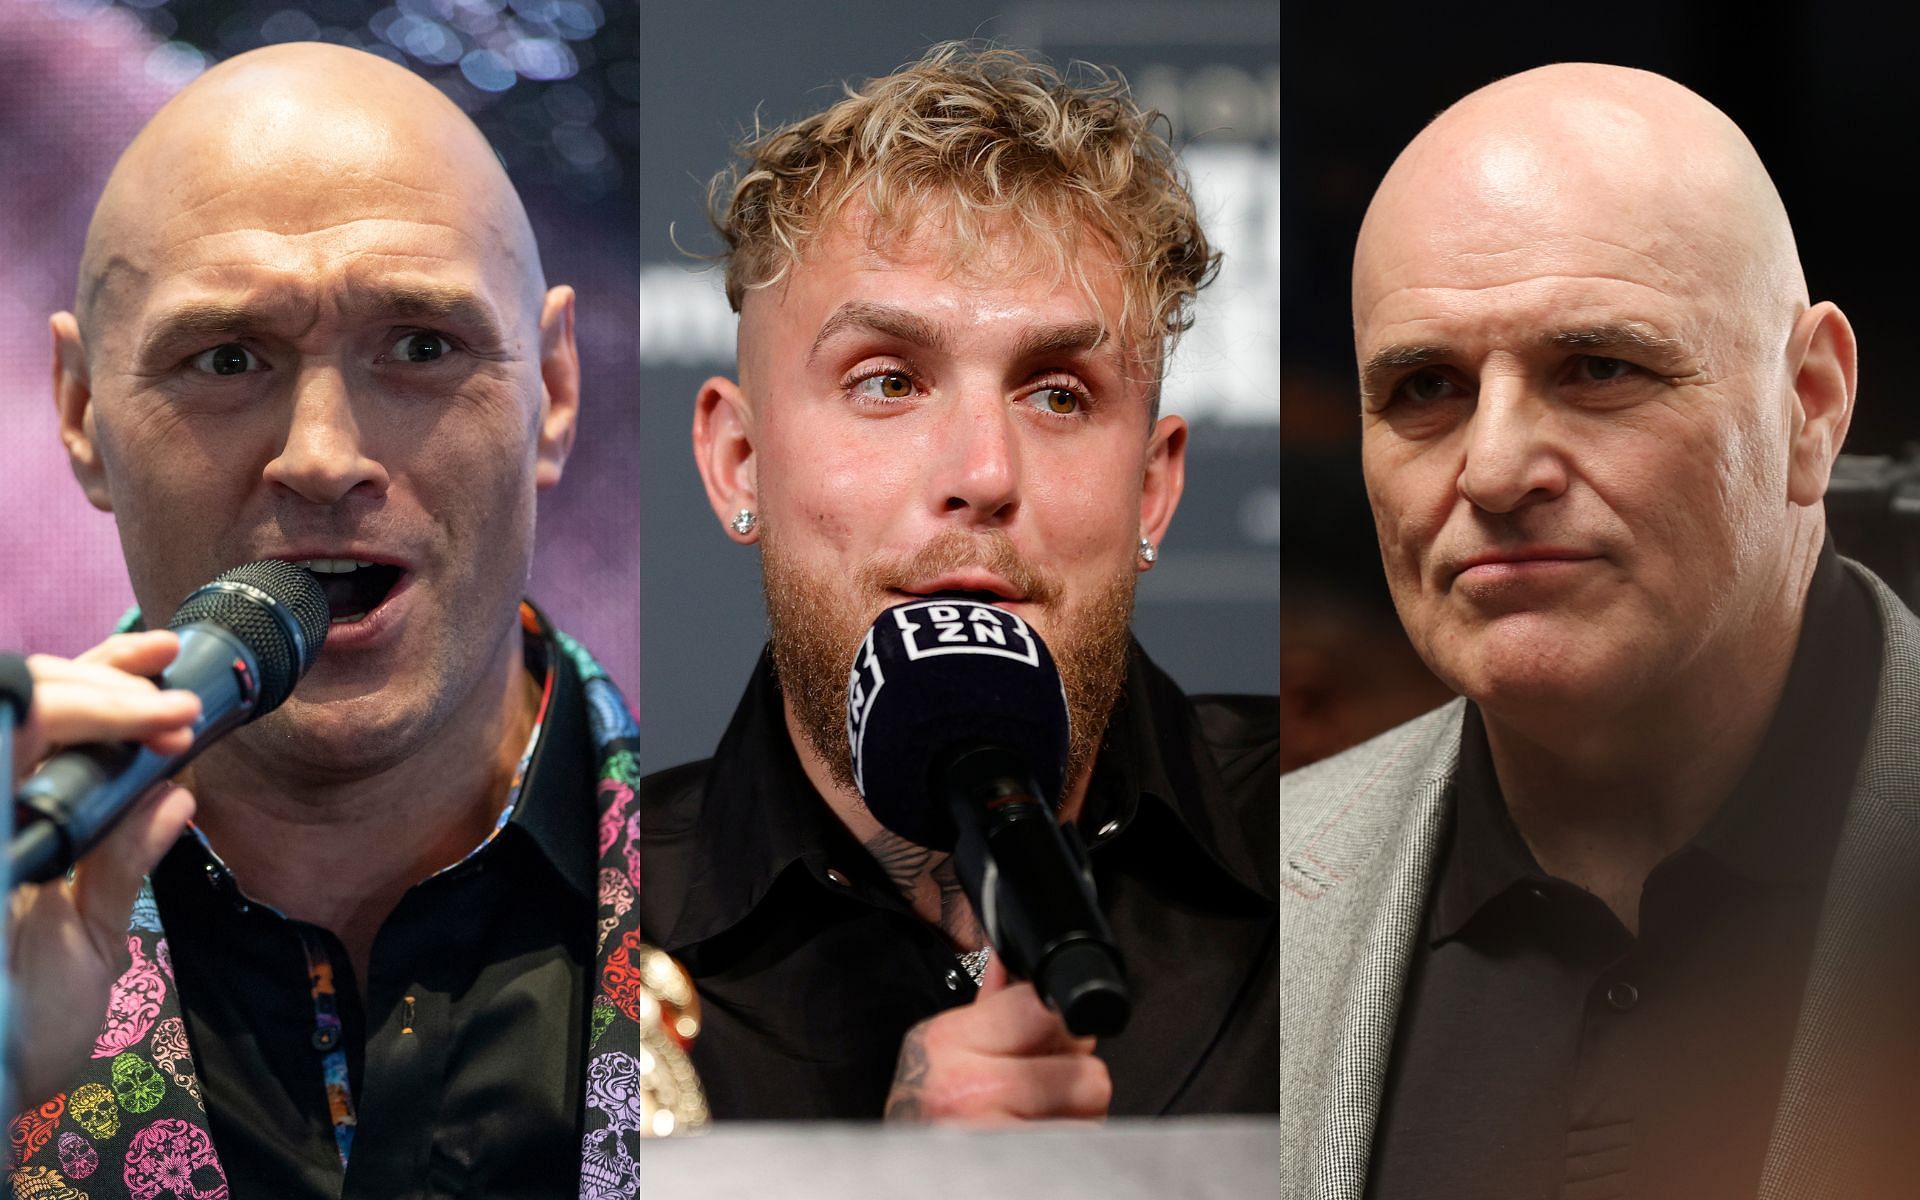 Tyson Fury (Left), Jake Paul (Middle), and John Fury (Right)